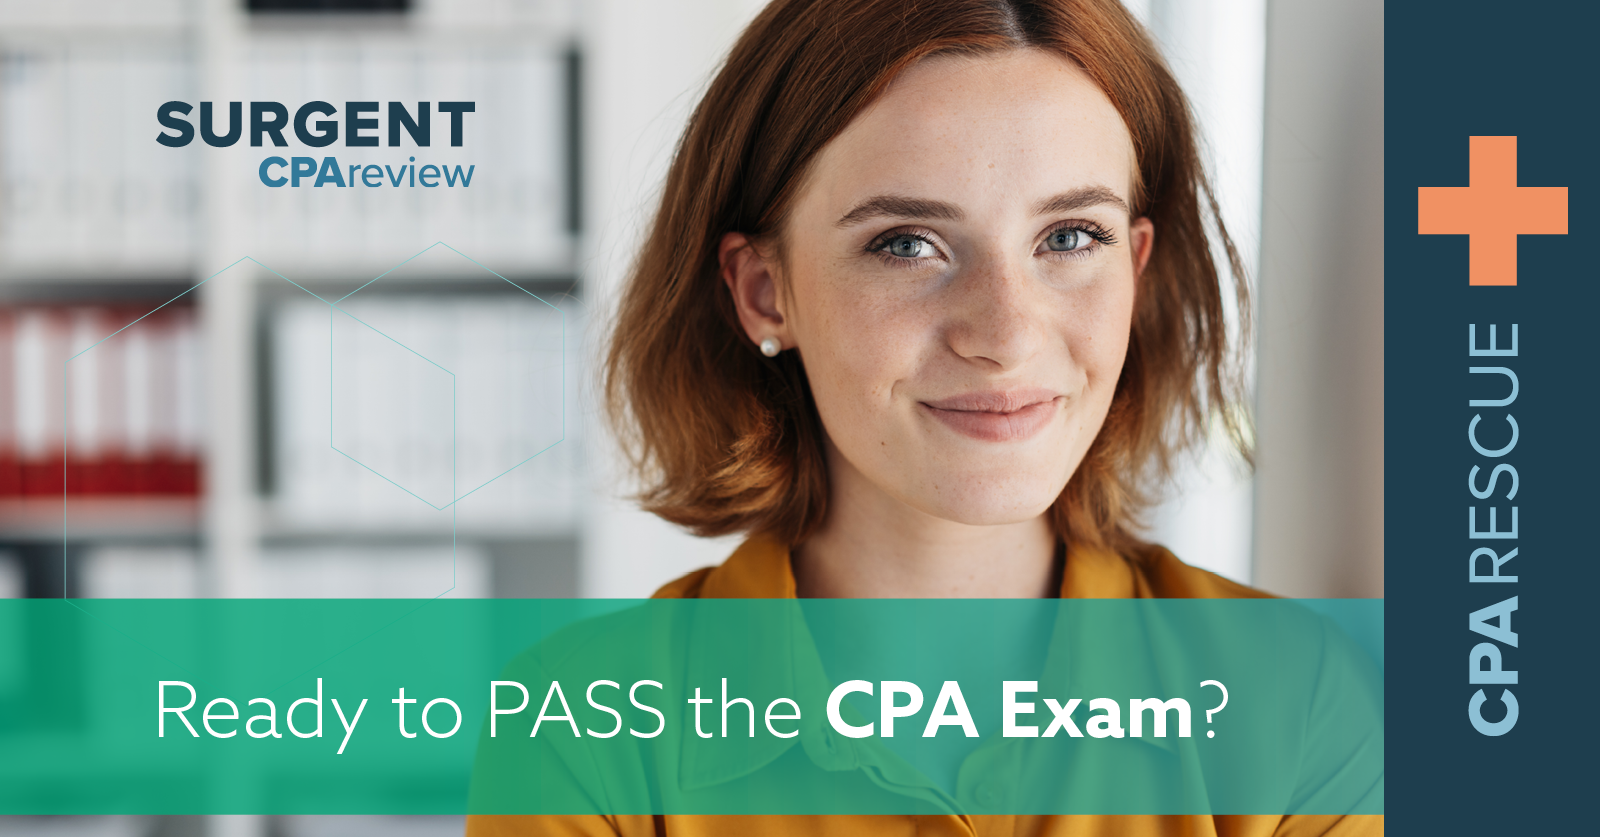 Close up of a young woman with red hair that is soft-smiling at the camera. Around her is the Surgent CPA Review logo and CPArescue promotional text.